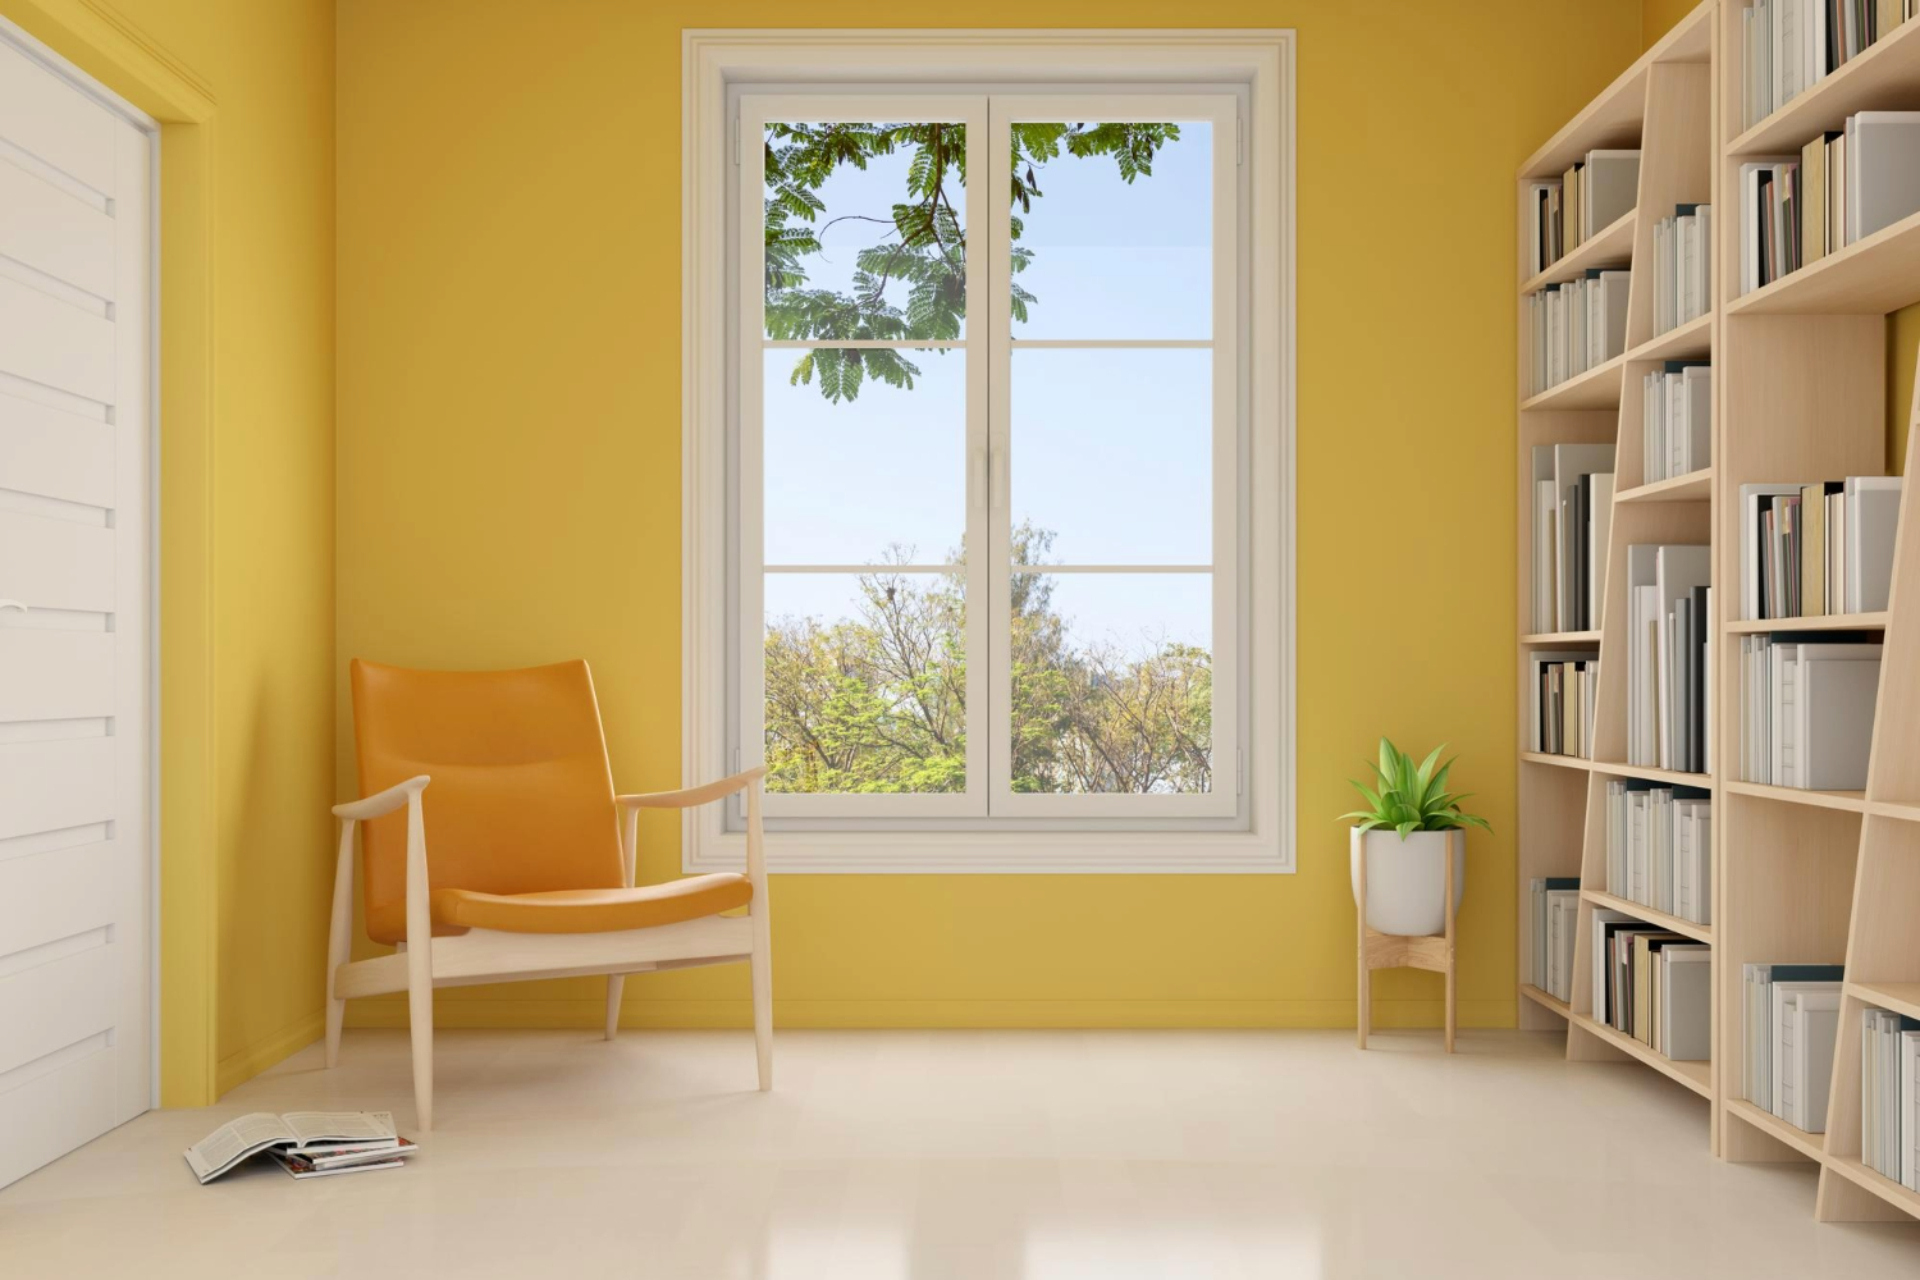 designing reading spaces with a view in apartments